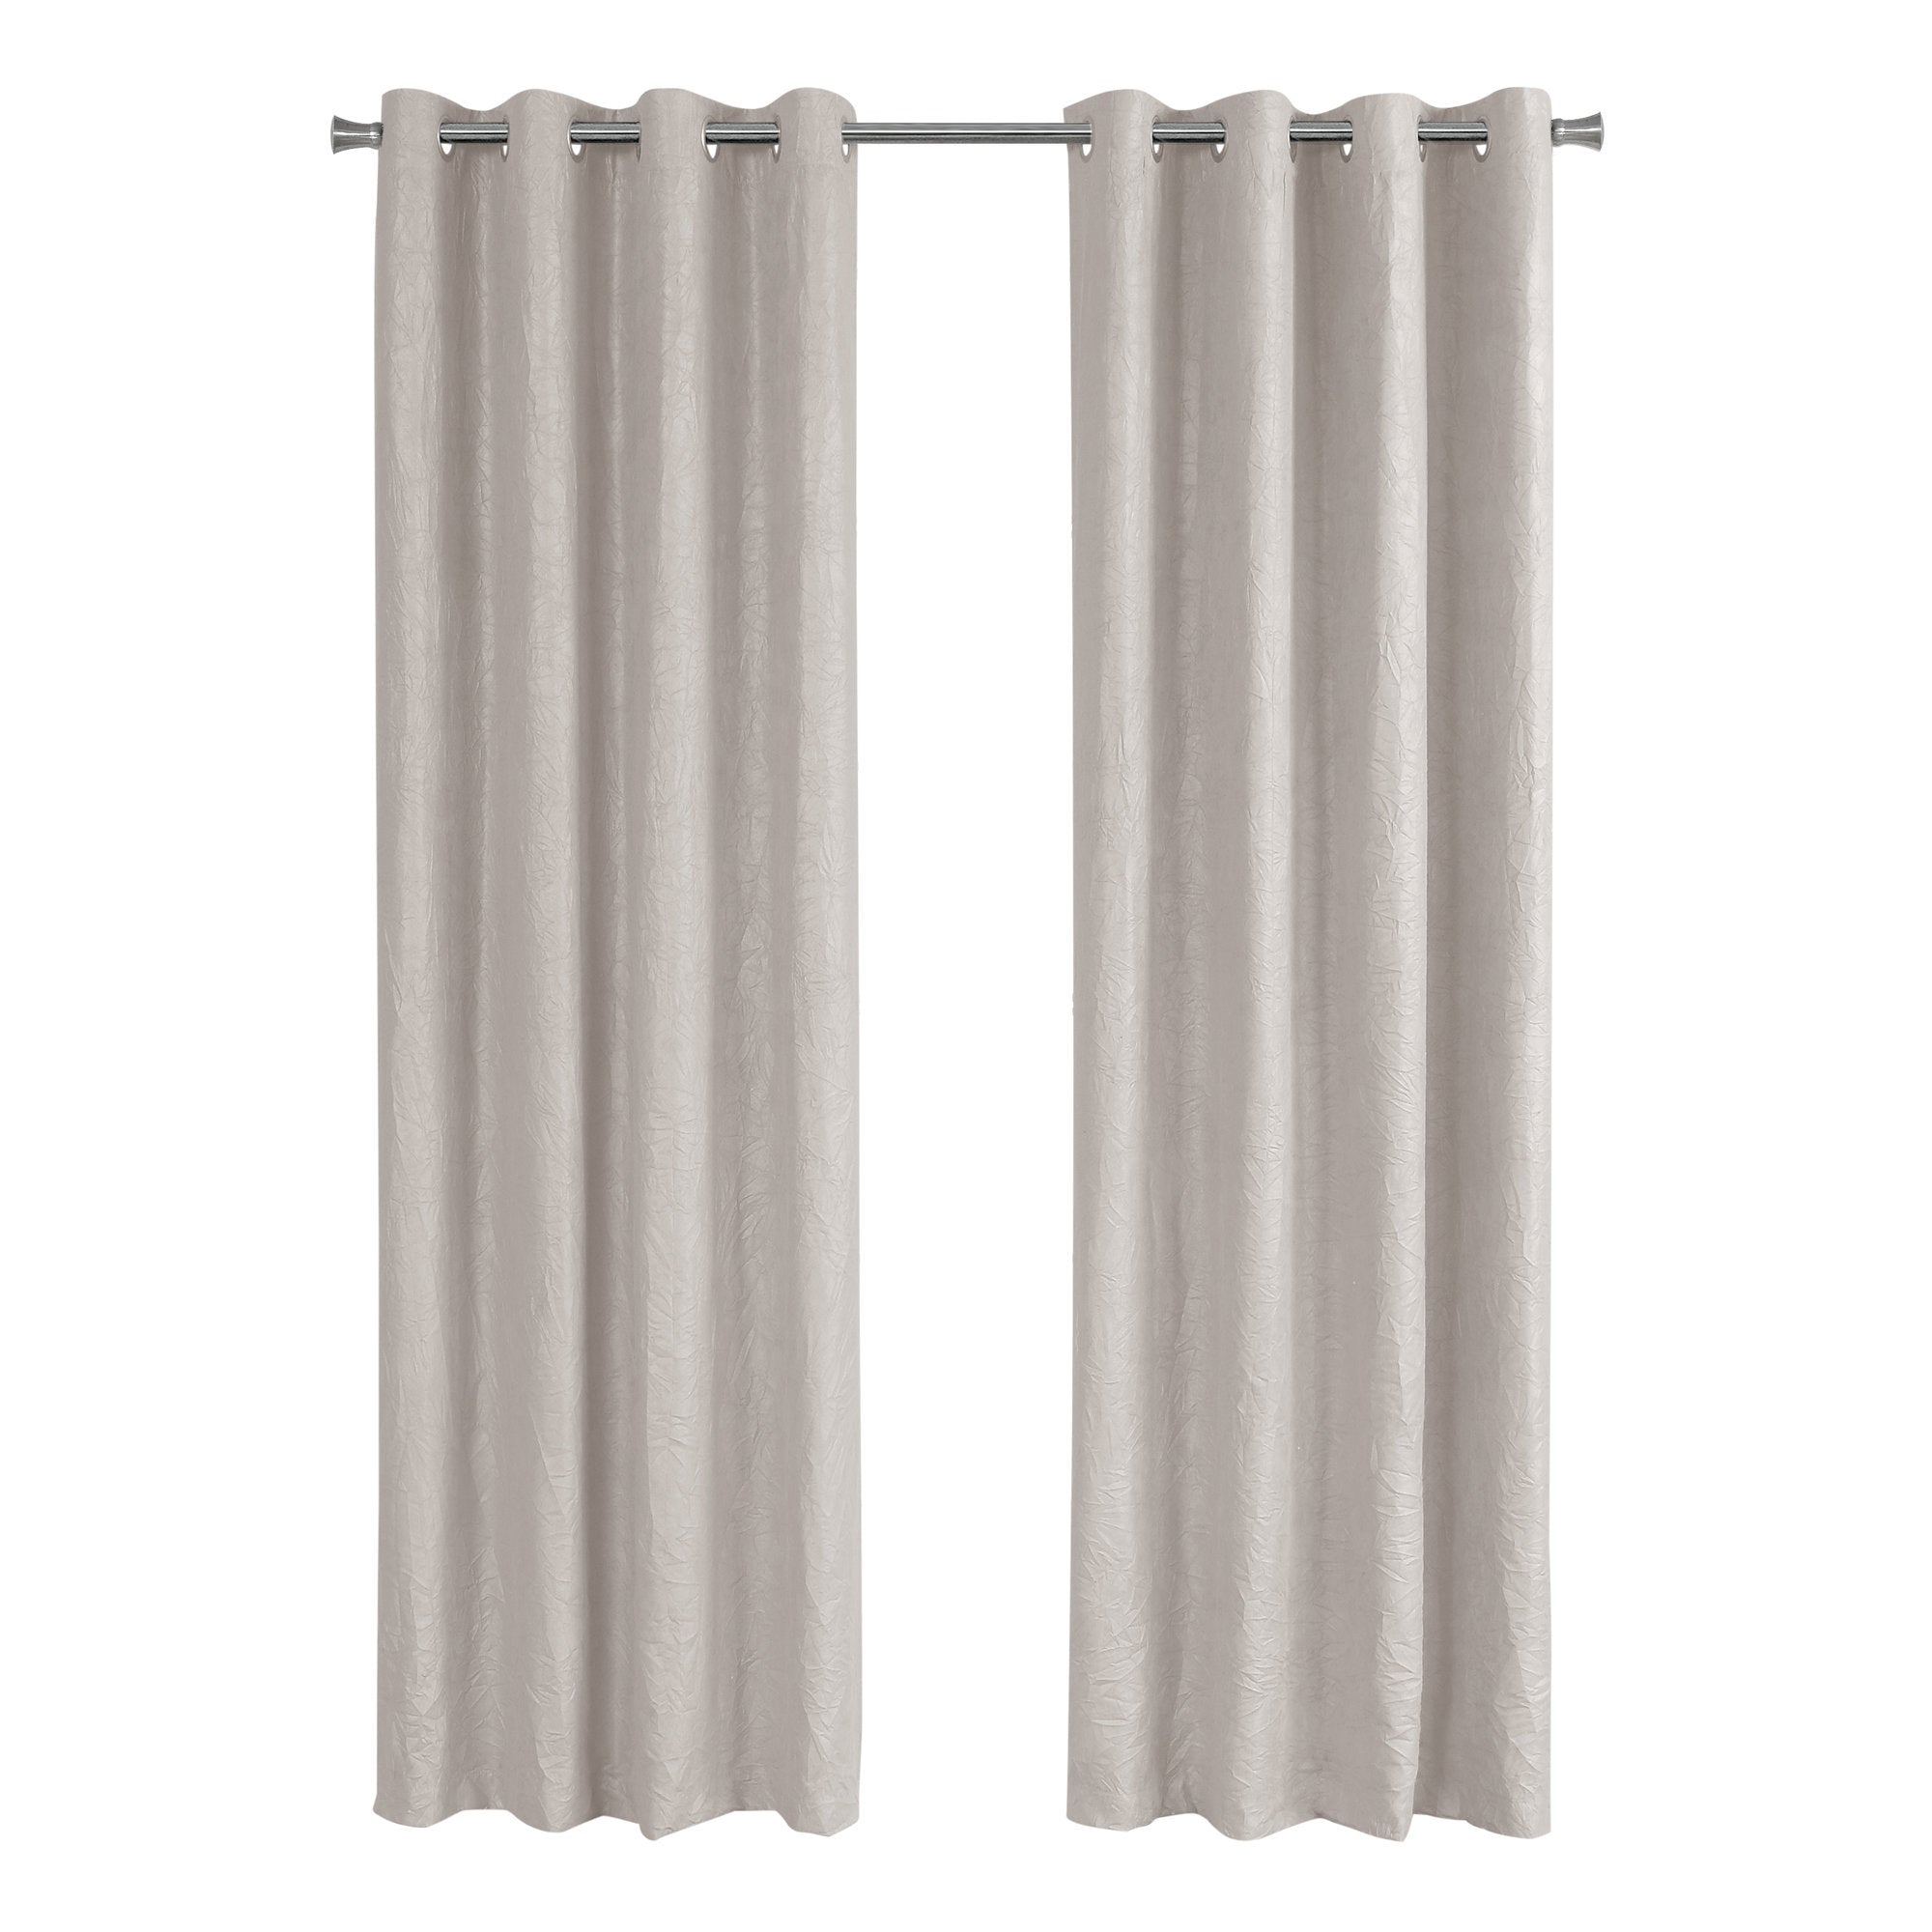 MN-909818    Curtain Panel, 2Pcs Set, 54"W X 95"L, Room Darkening, Grommet, Living Room, Bedroom, Kitchen, Micro Suede, Wrinkled  Finish, Polyester Room Darkening Fabric, Ivory, Contemporary, Modern